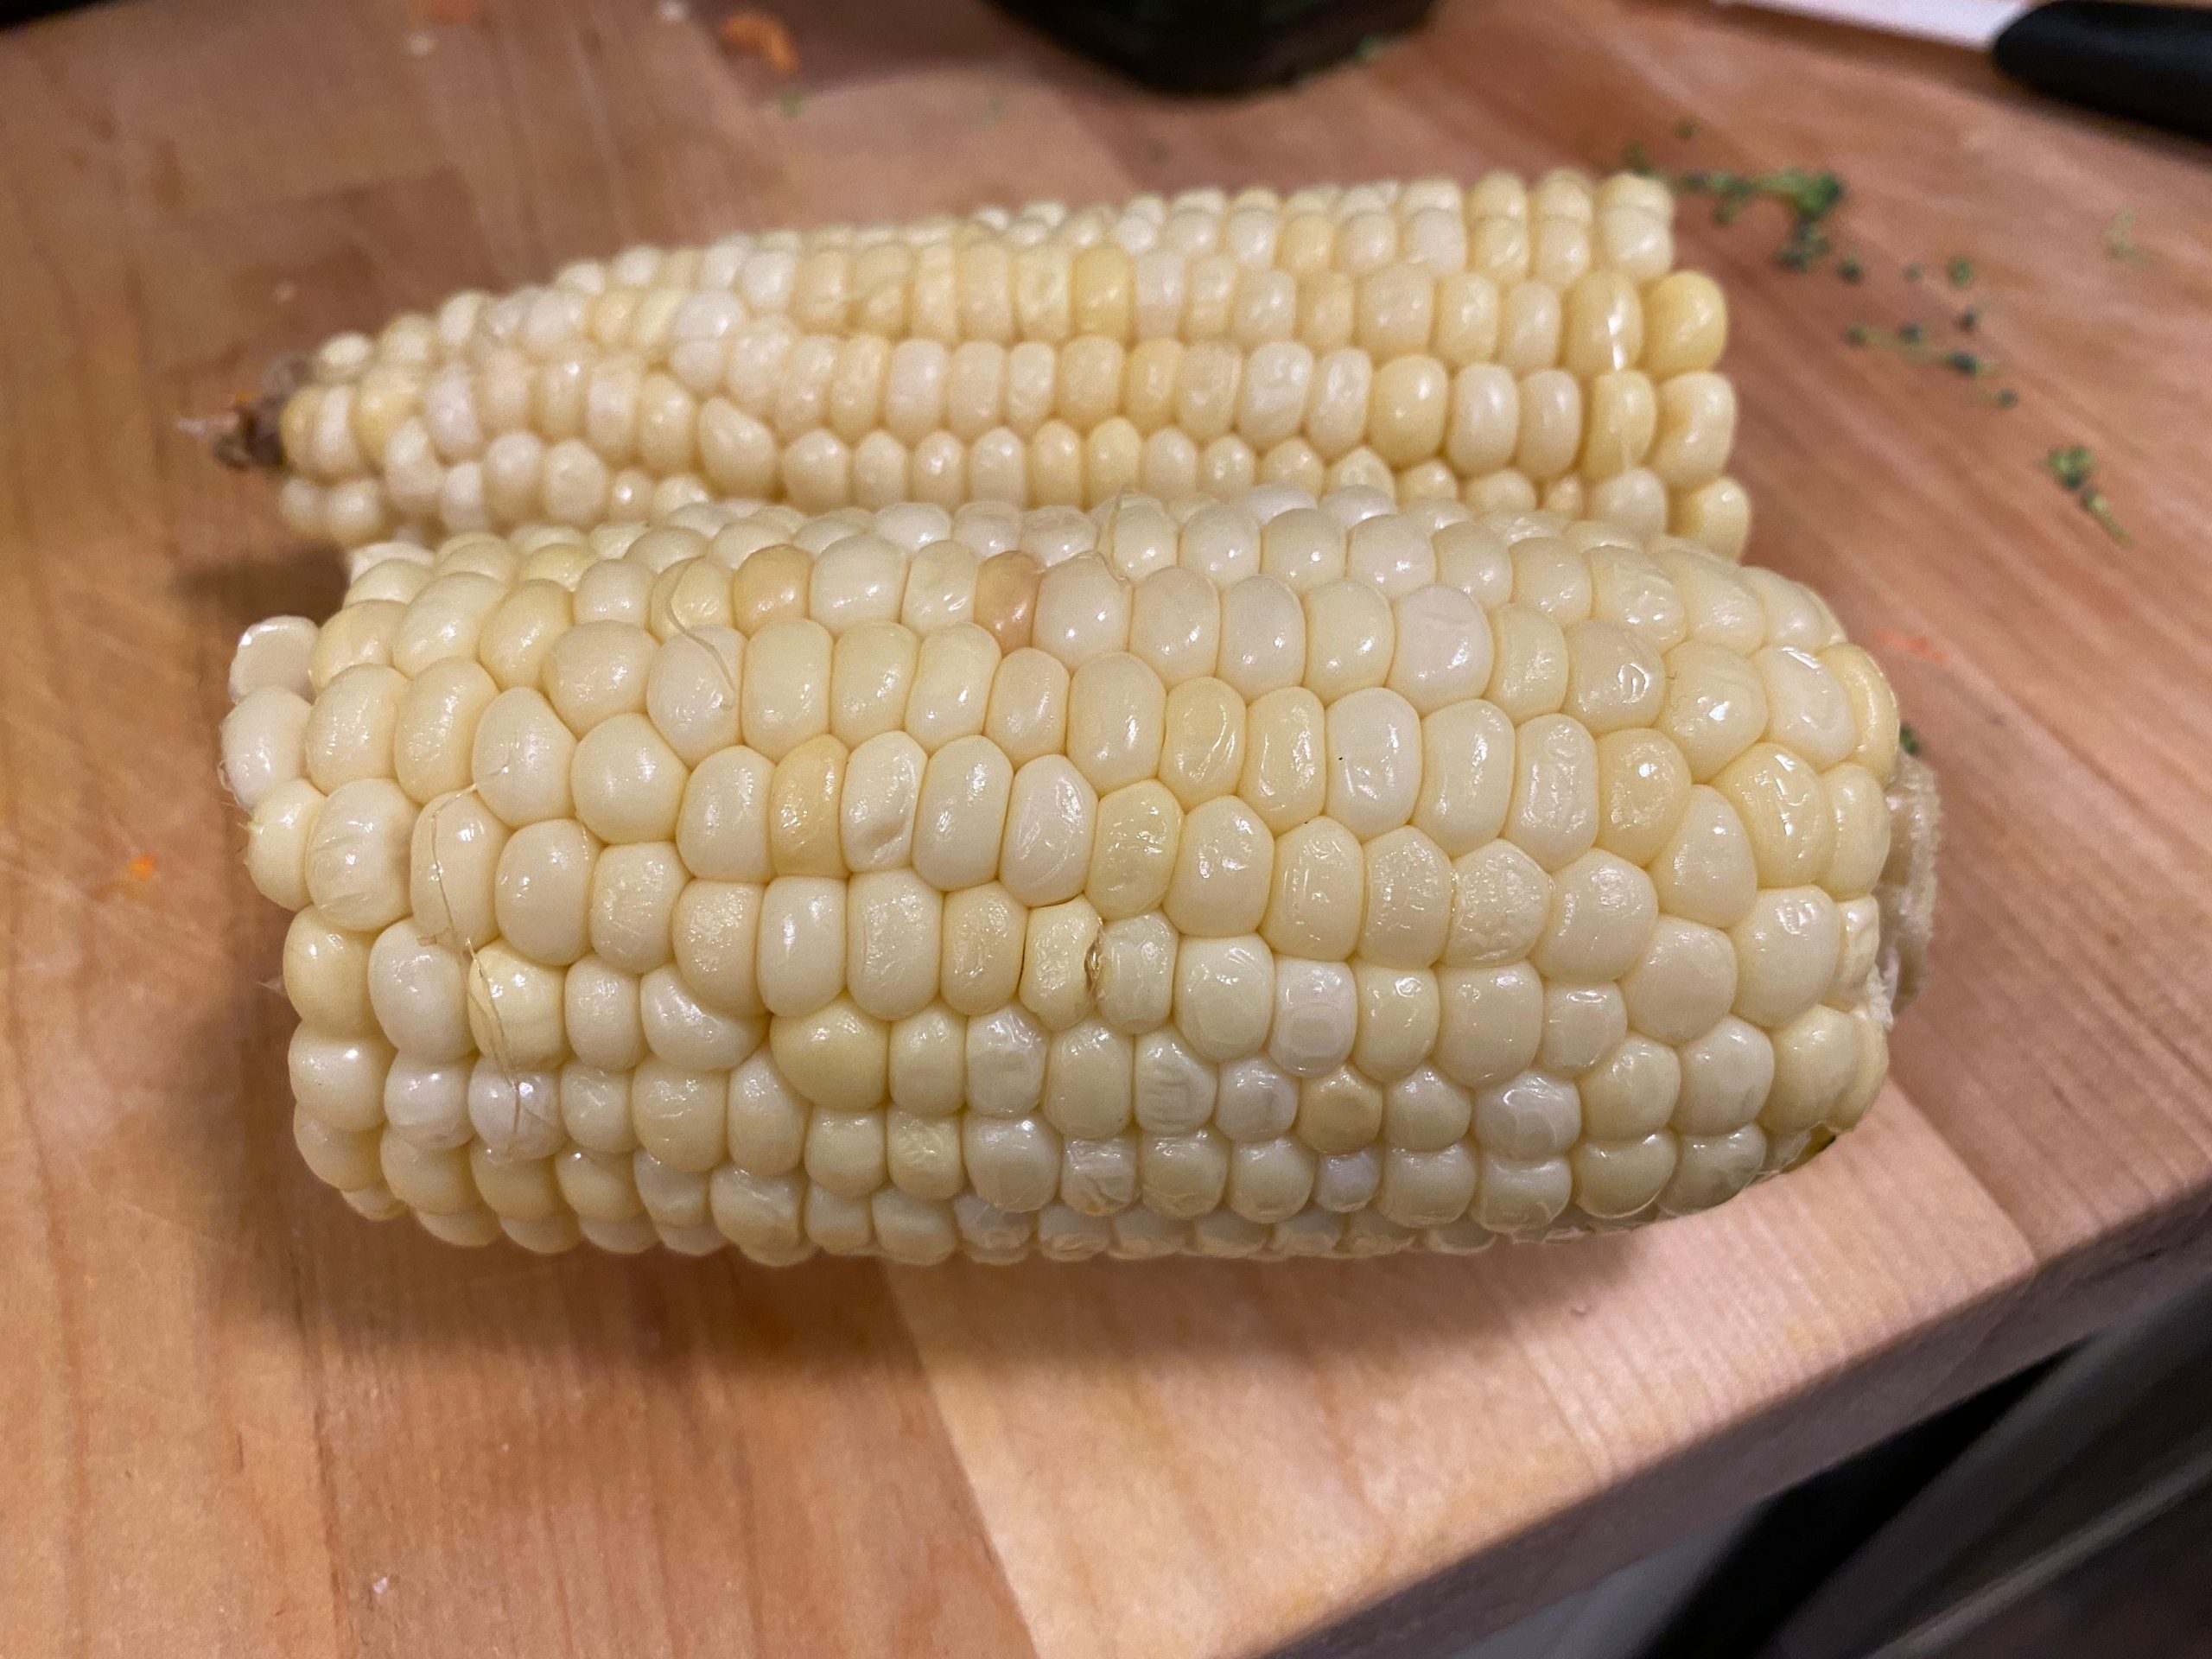 Two ears of corn on a wooden table.